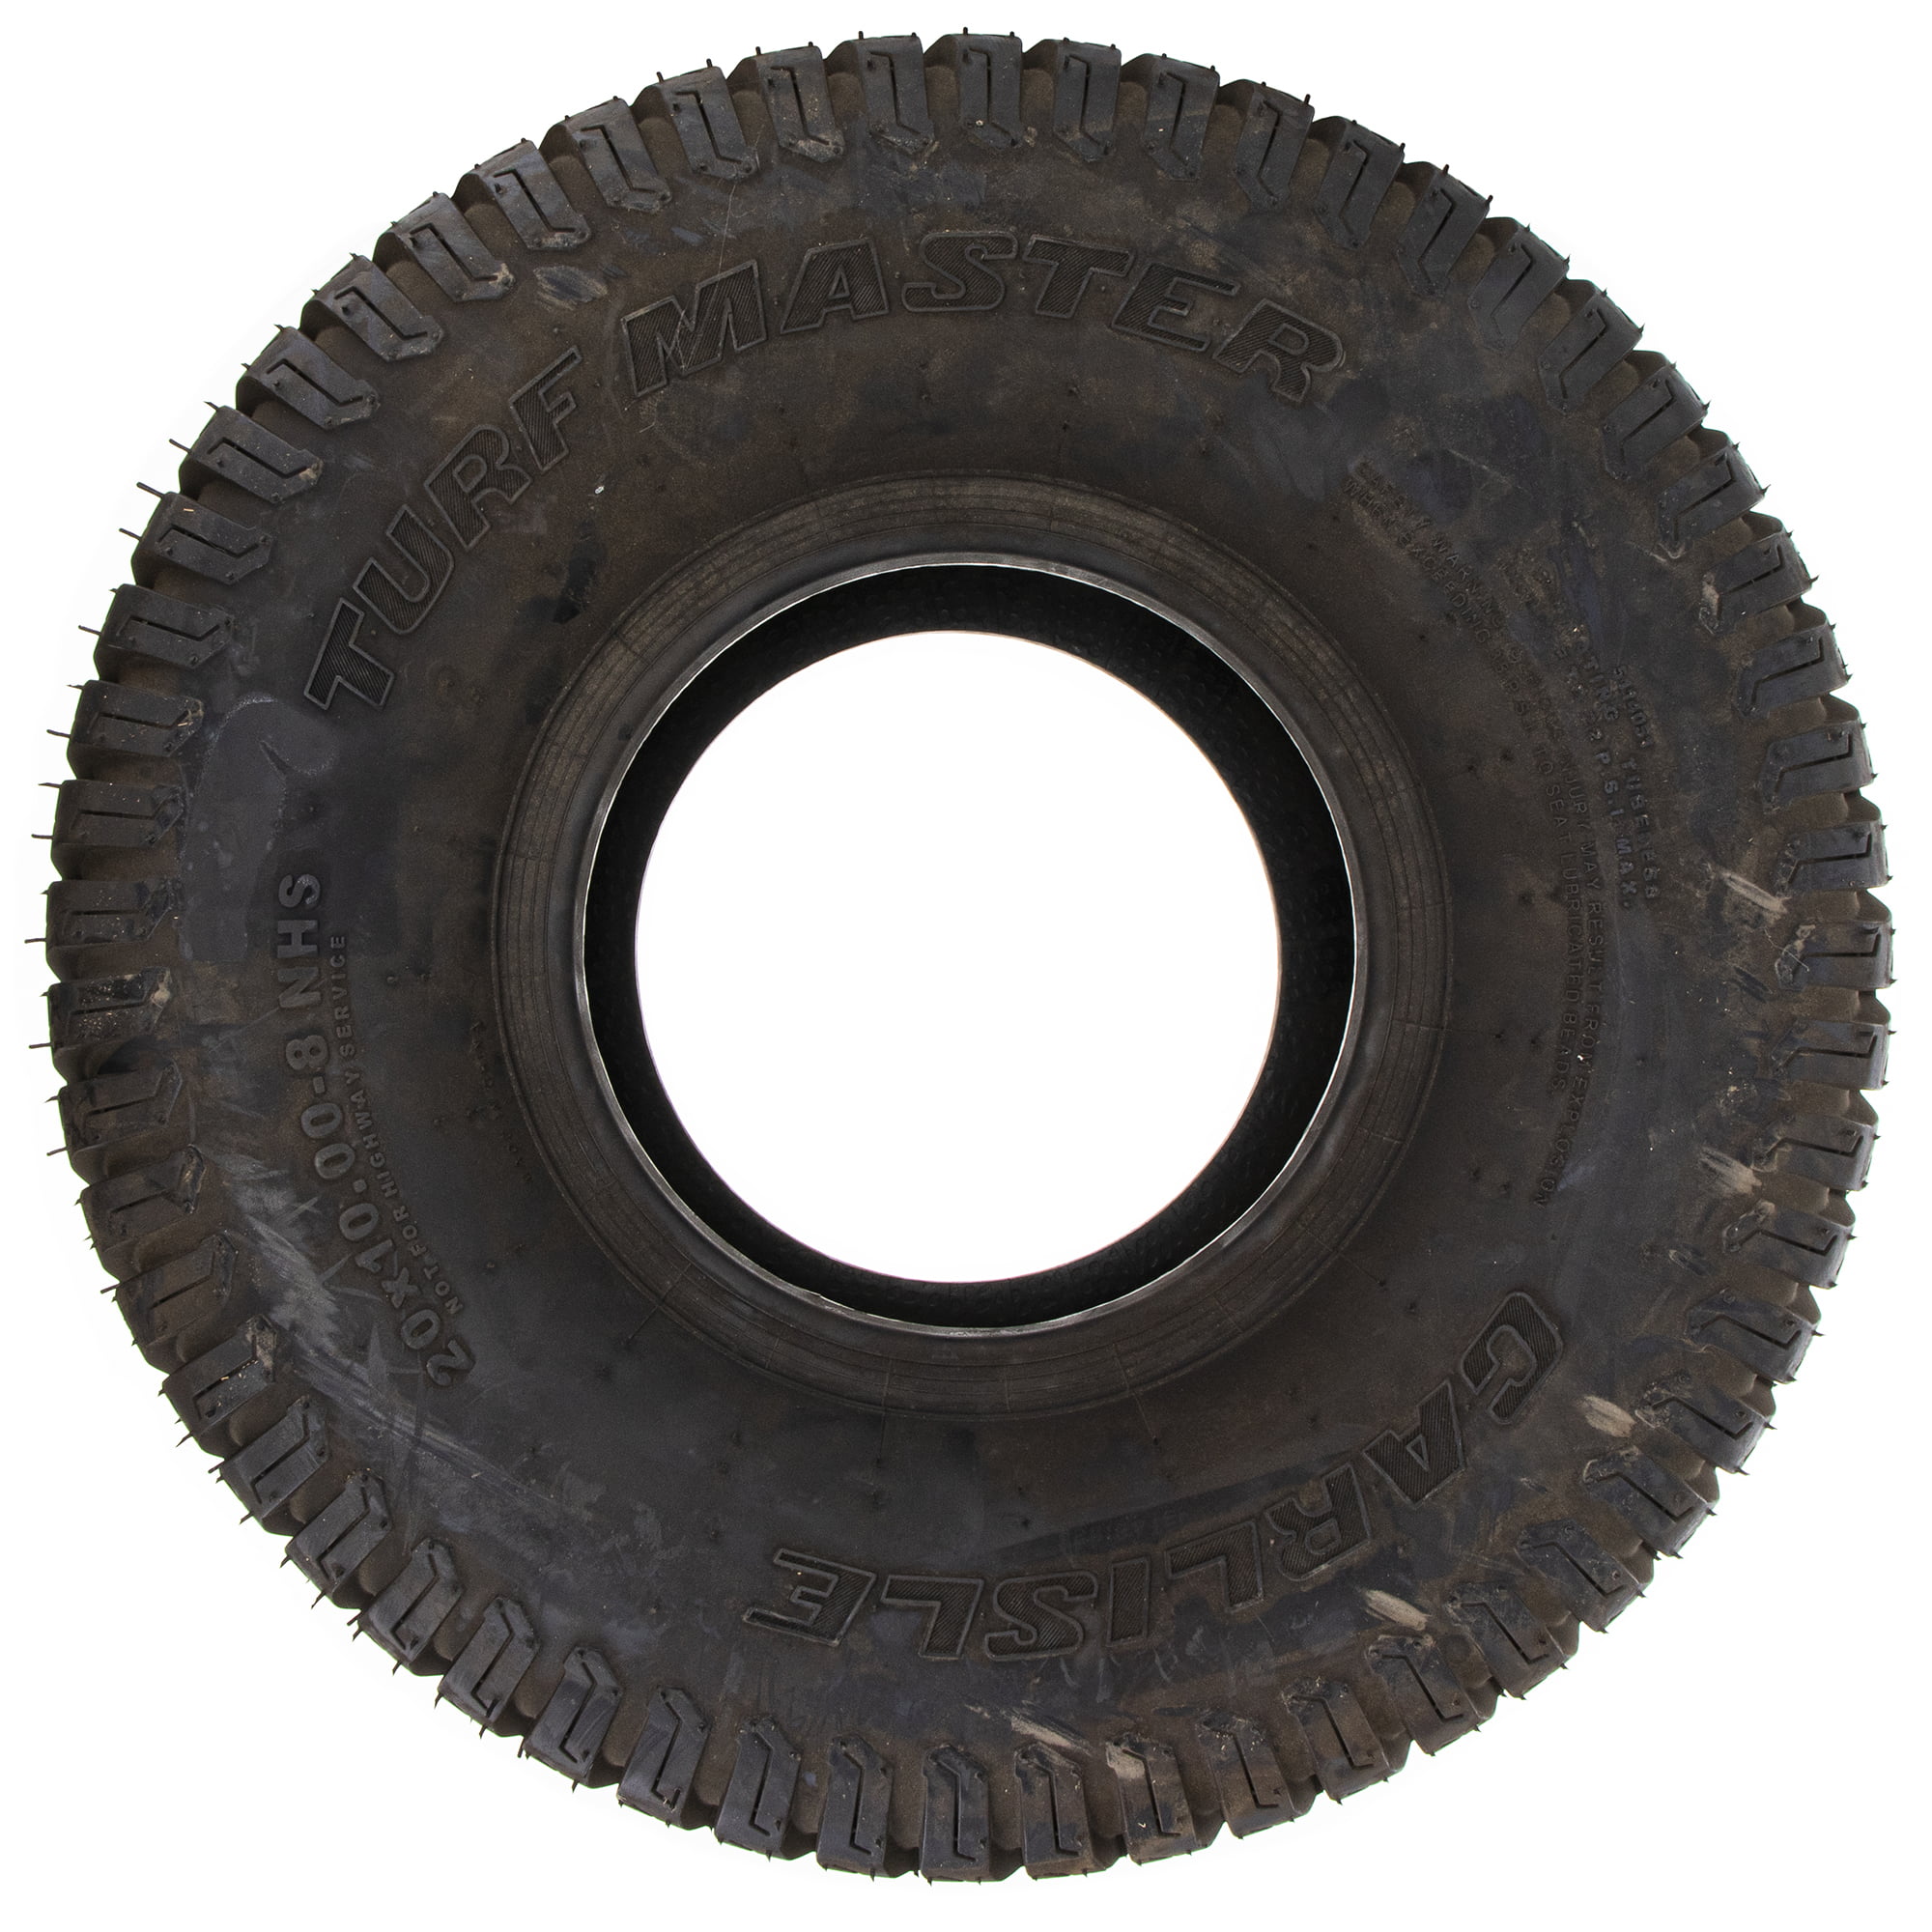 Details about   Carlisle Riding Mower Rear Tire 20x10-8 125833 122082